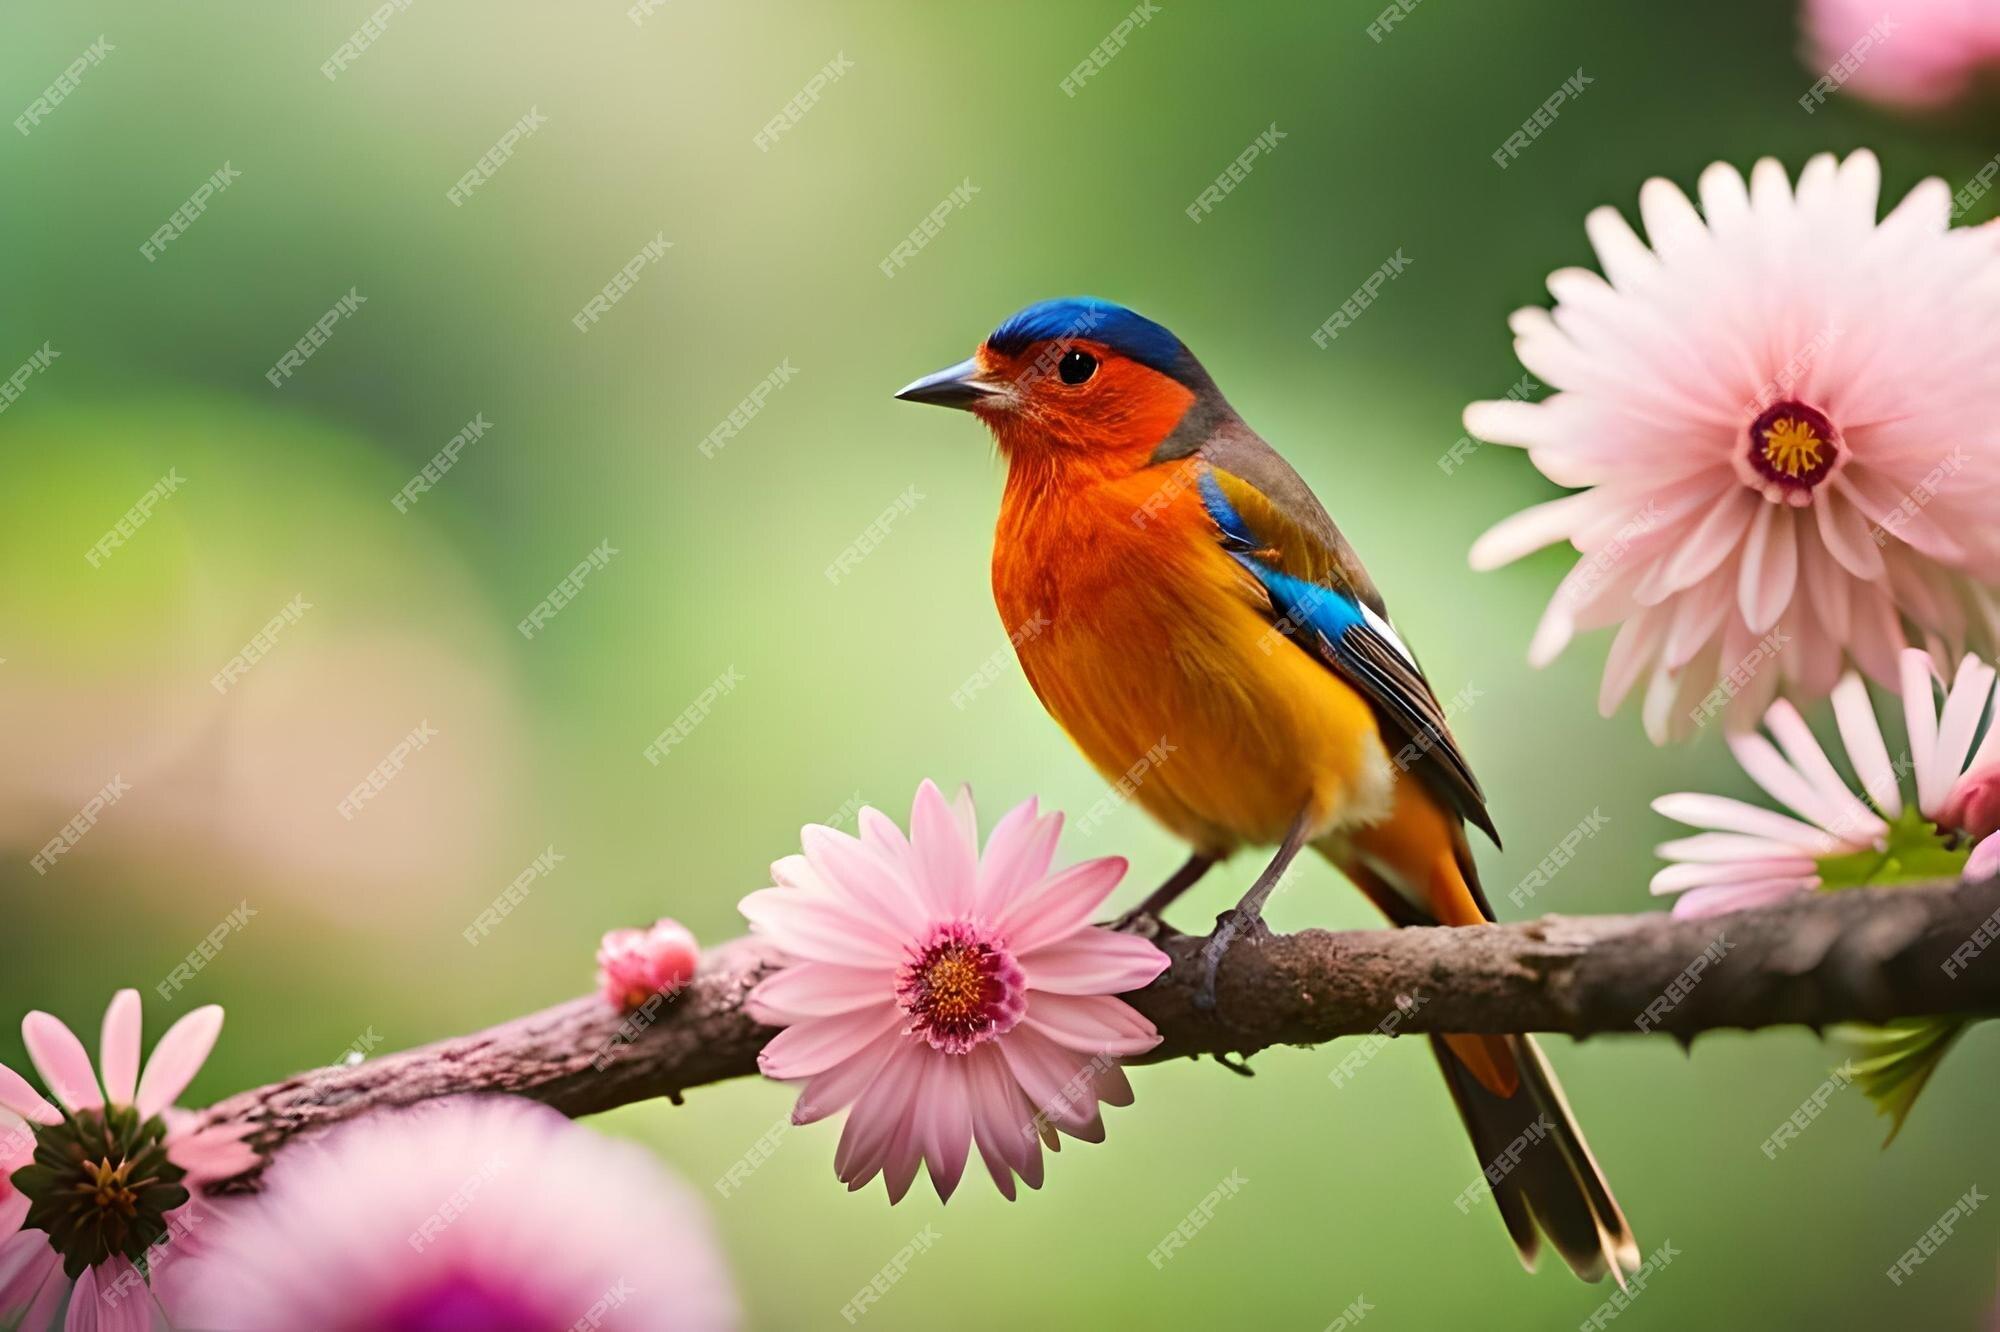 Premium Photo A Colorful Bird With Blue Eyes And Pink Flower